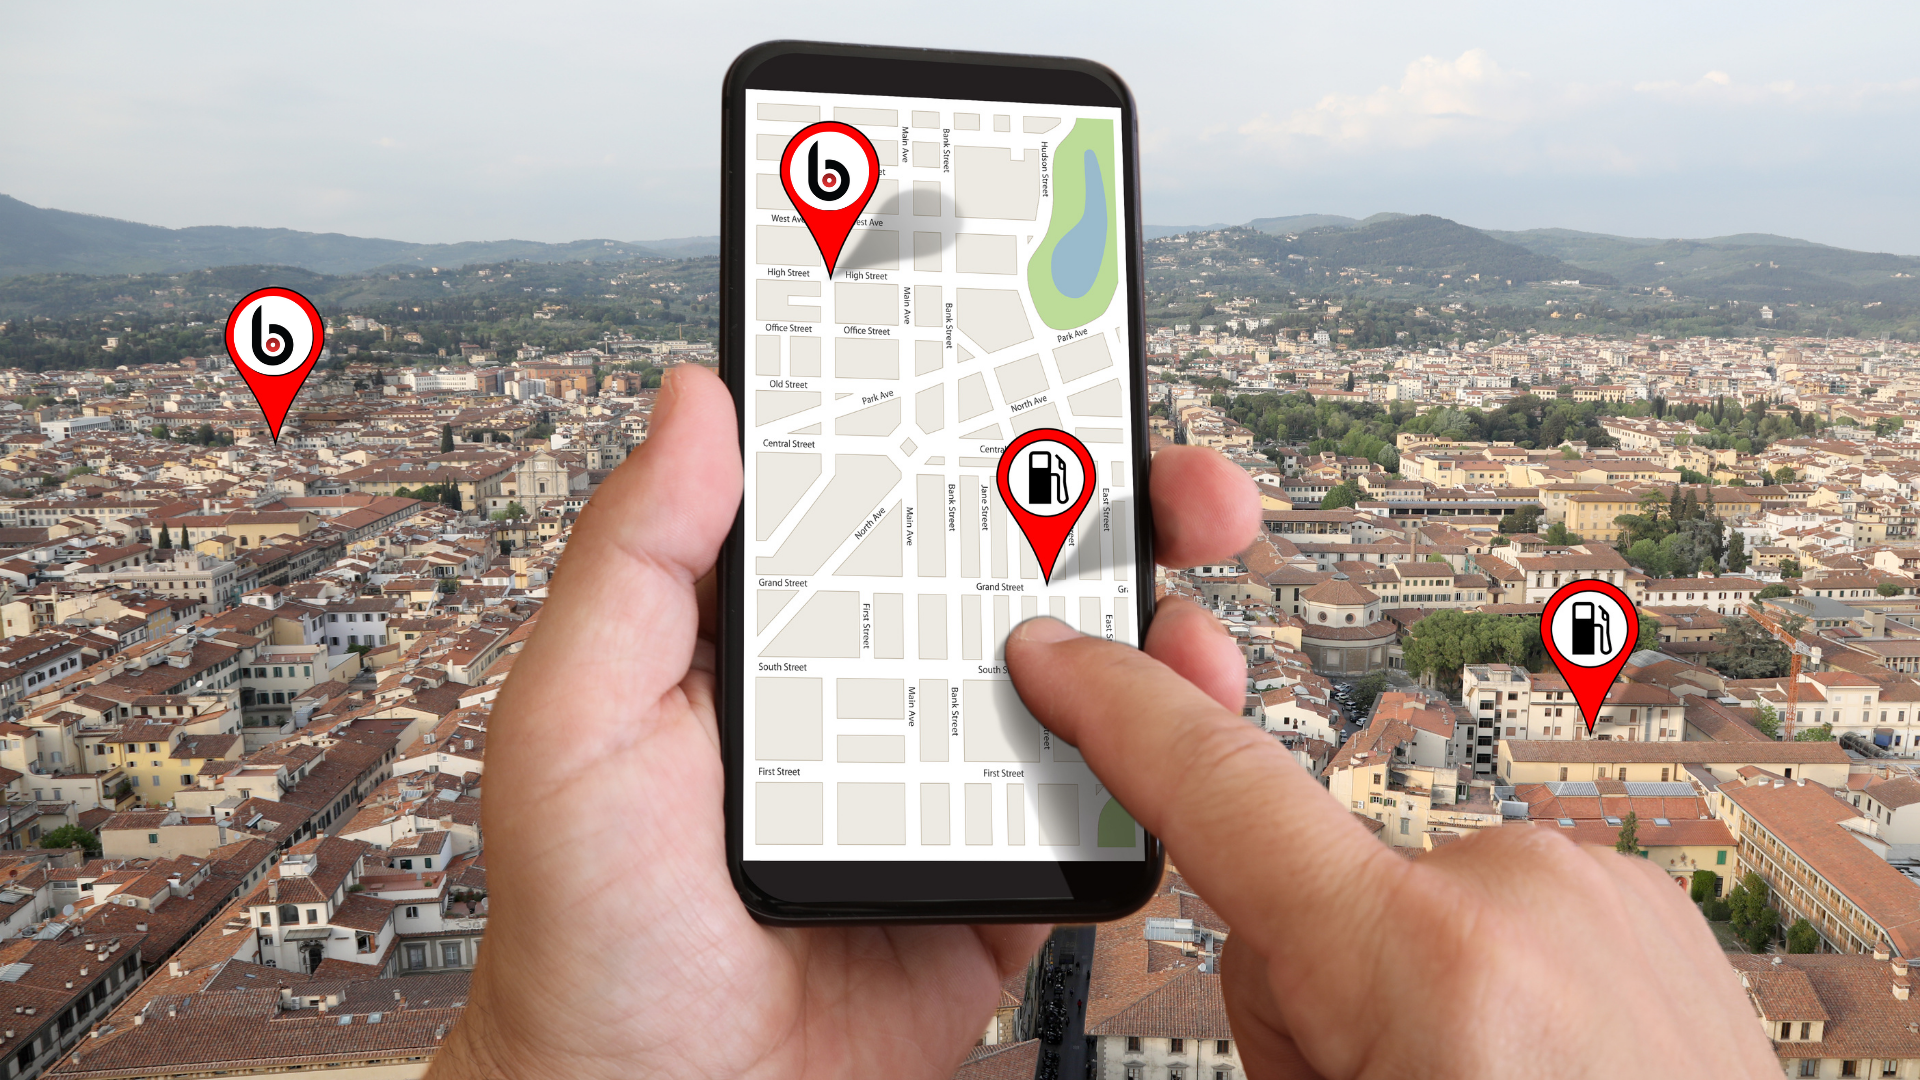 Geofencing marketing helps you target consumers within a specific radius from your location.